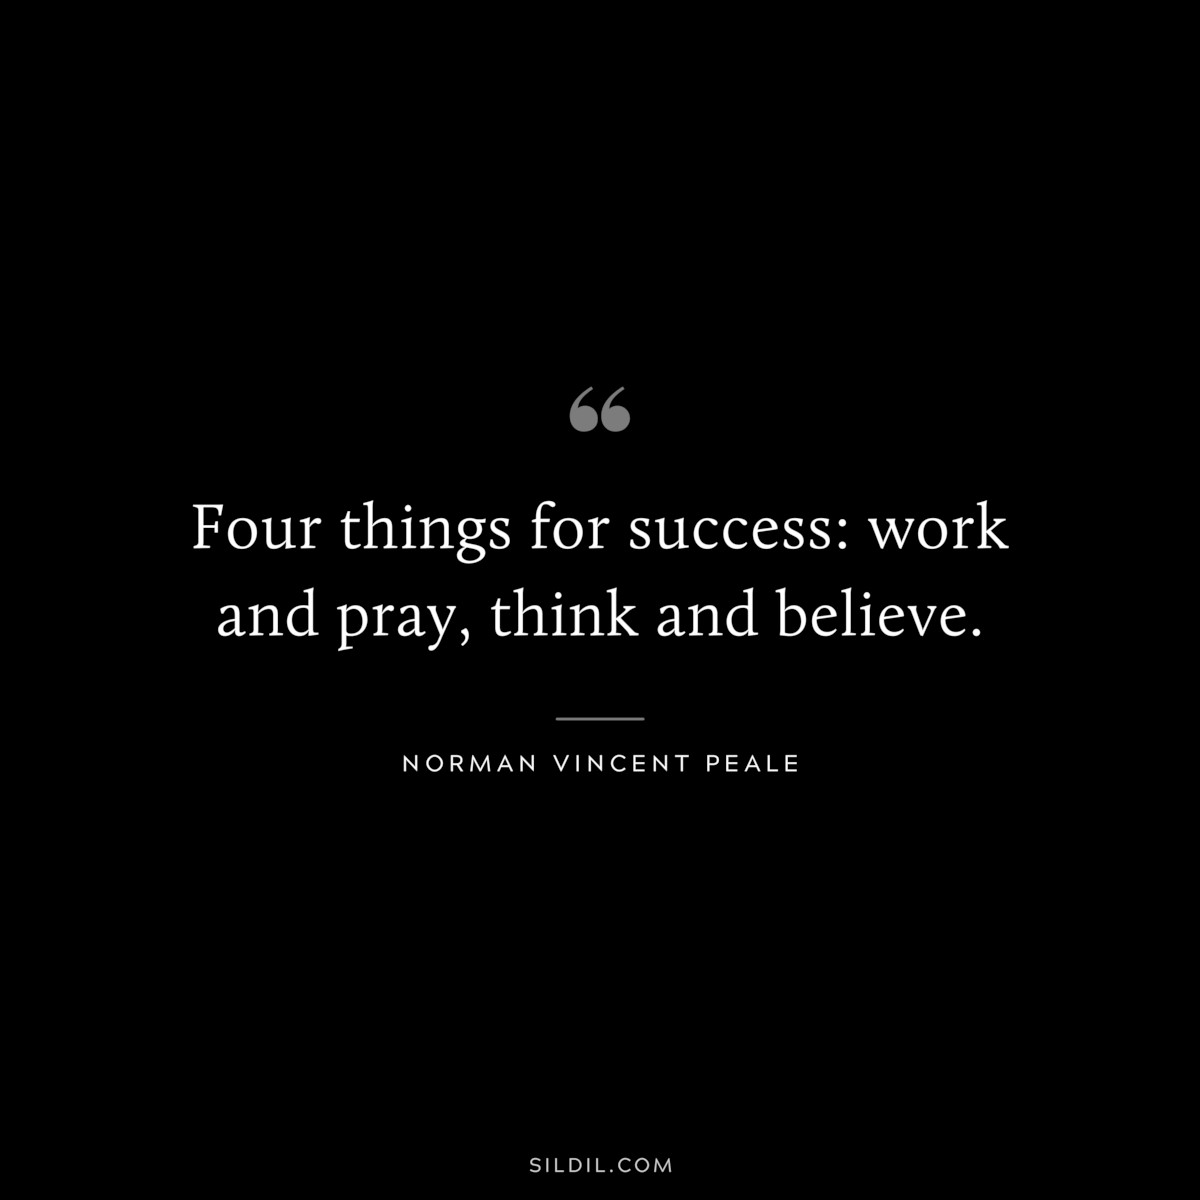 Four things for success: work and pray, think and believe. Norman Vincent Peale